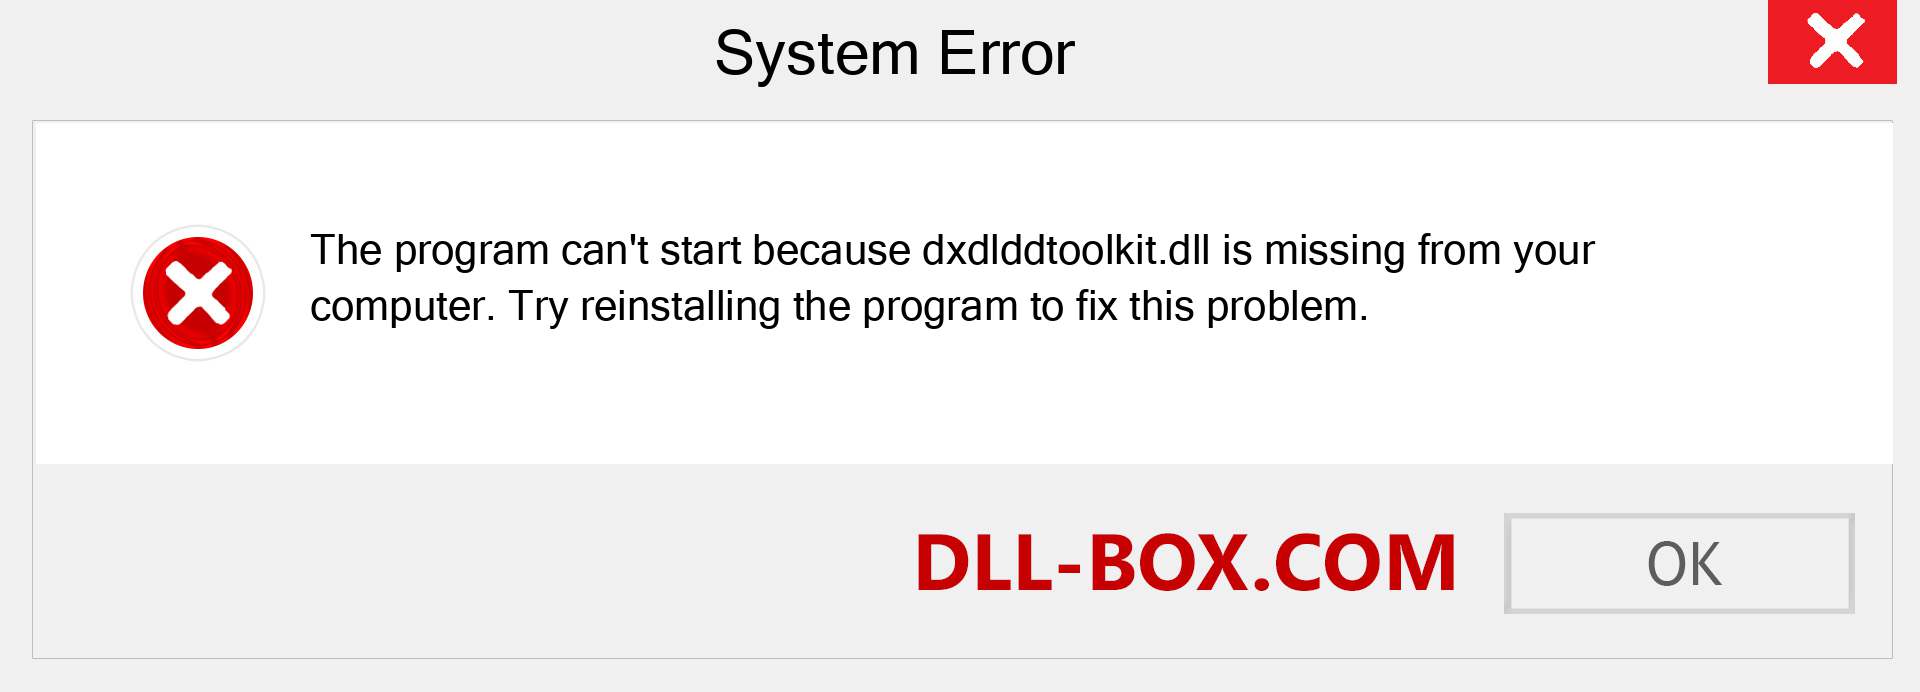  dxdlddtoolkit.dll file is missing?. Download for Windows 7, 8, 10 - Fix  dxdlddtoolkit dll Missing Error on Windows, photos, images